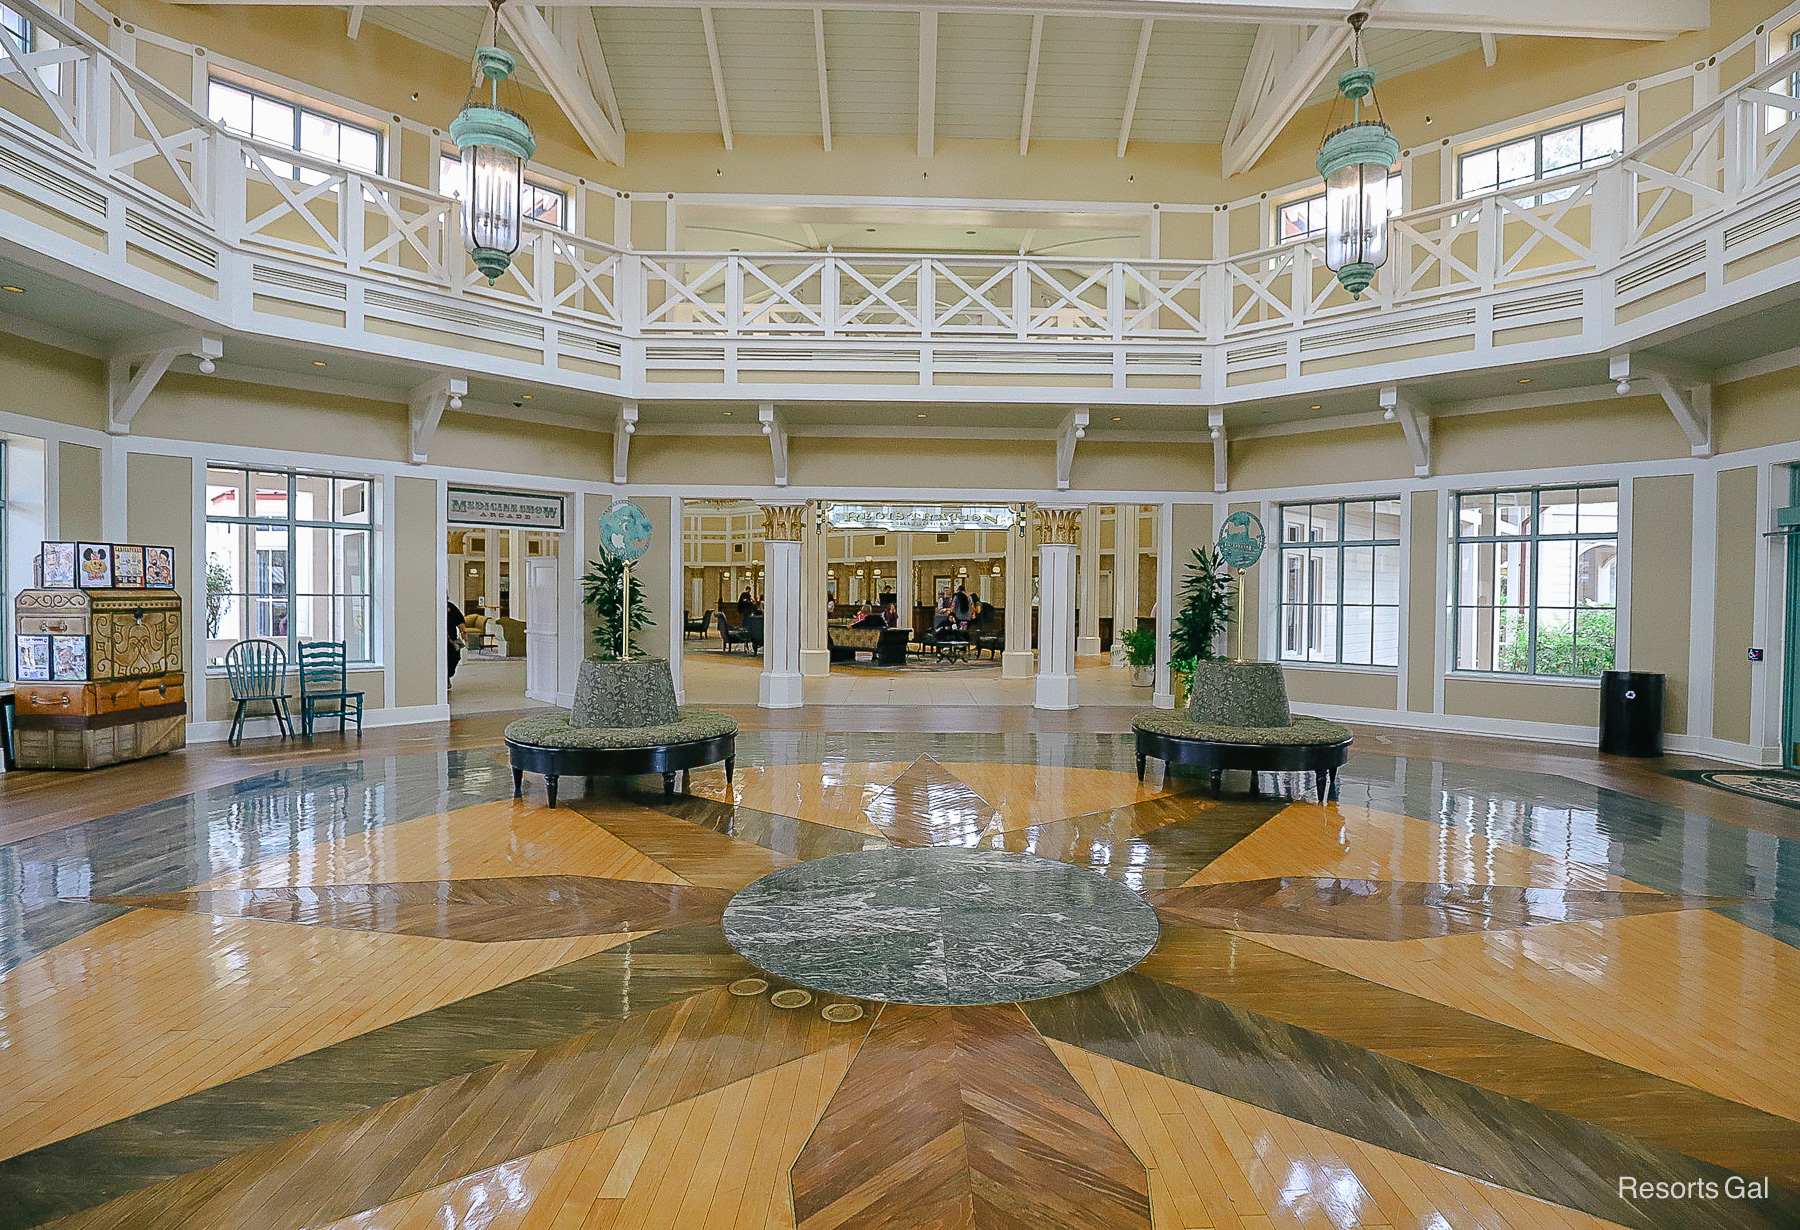 the foyer to Port Orleans Riverside with decorative wood floor with marble center 